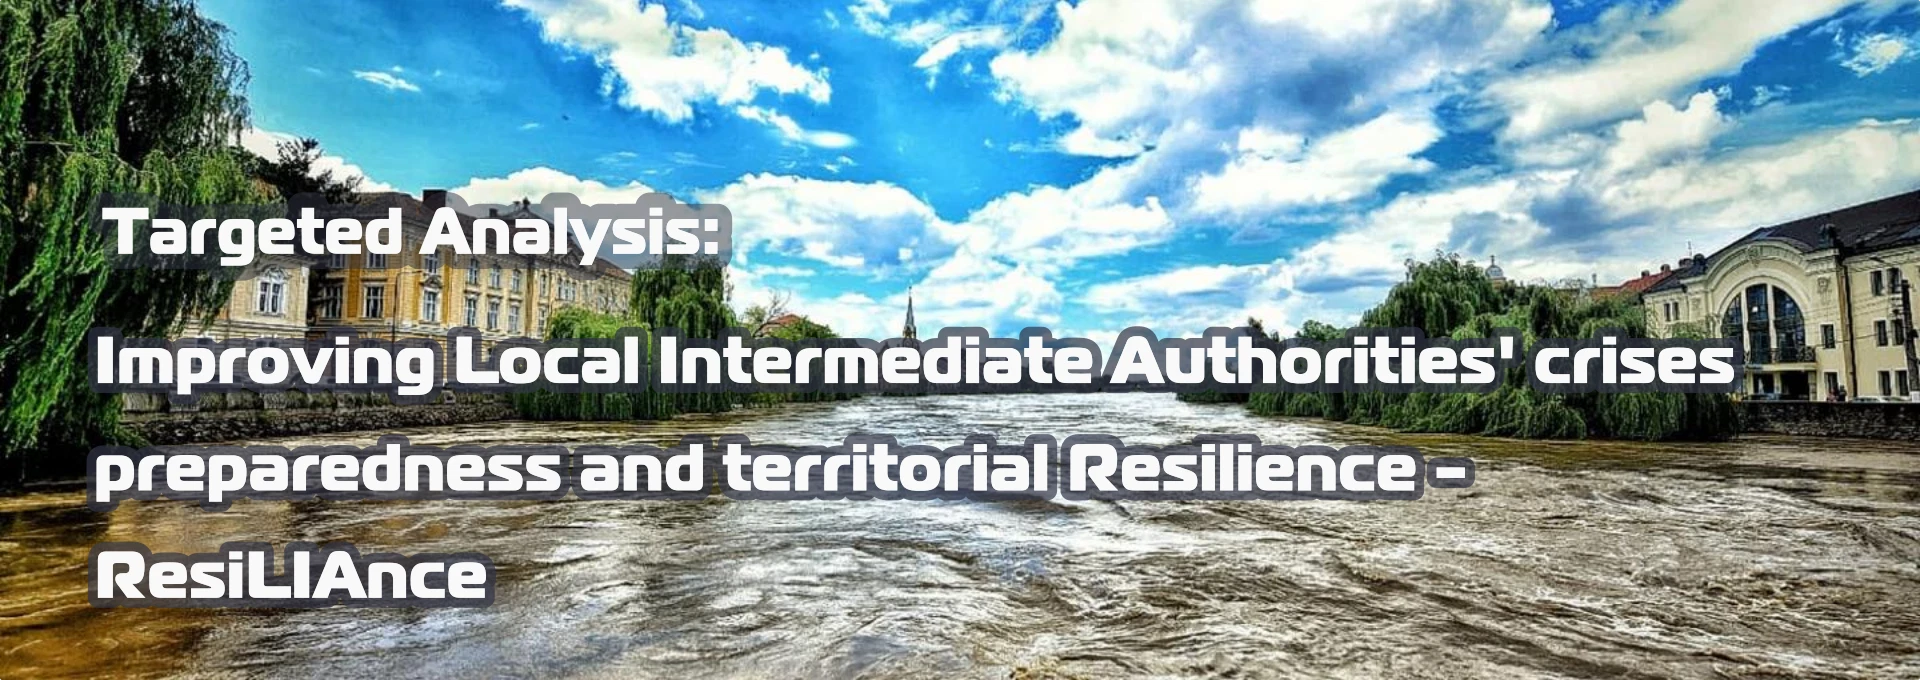 Targeted Analysis: Improving Local Intermediate Authorities' crises preparedness and territorial Resilience - ResiLIAnce